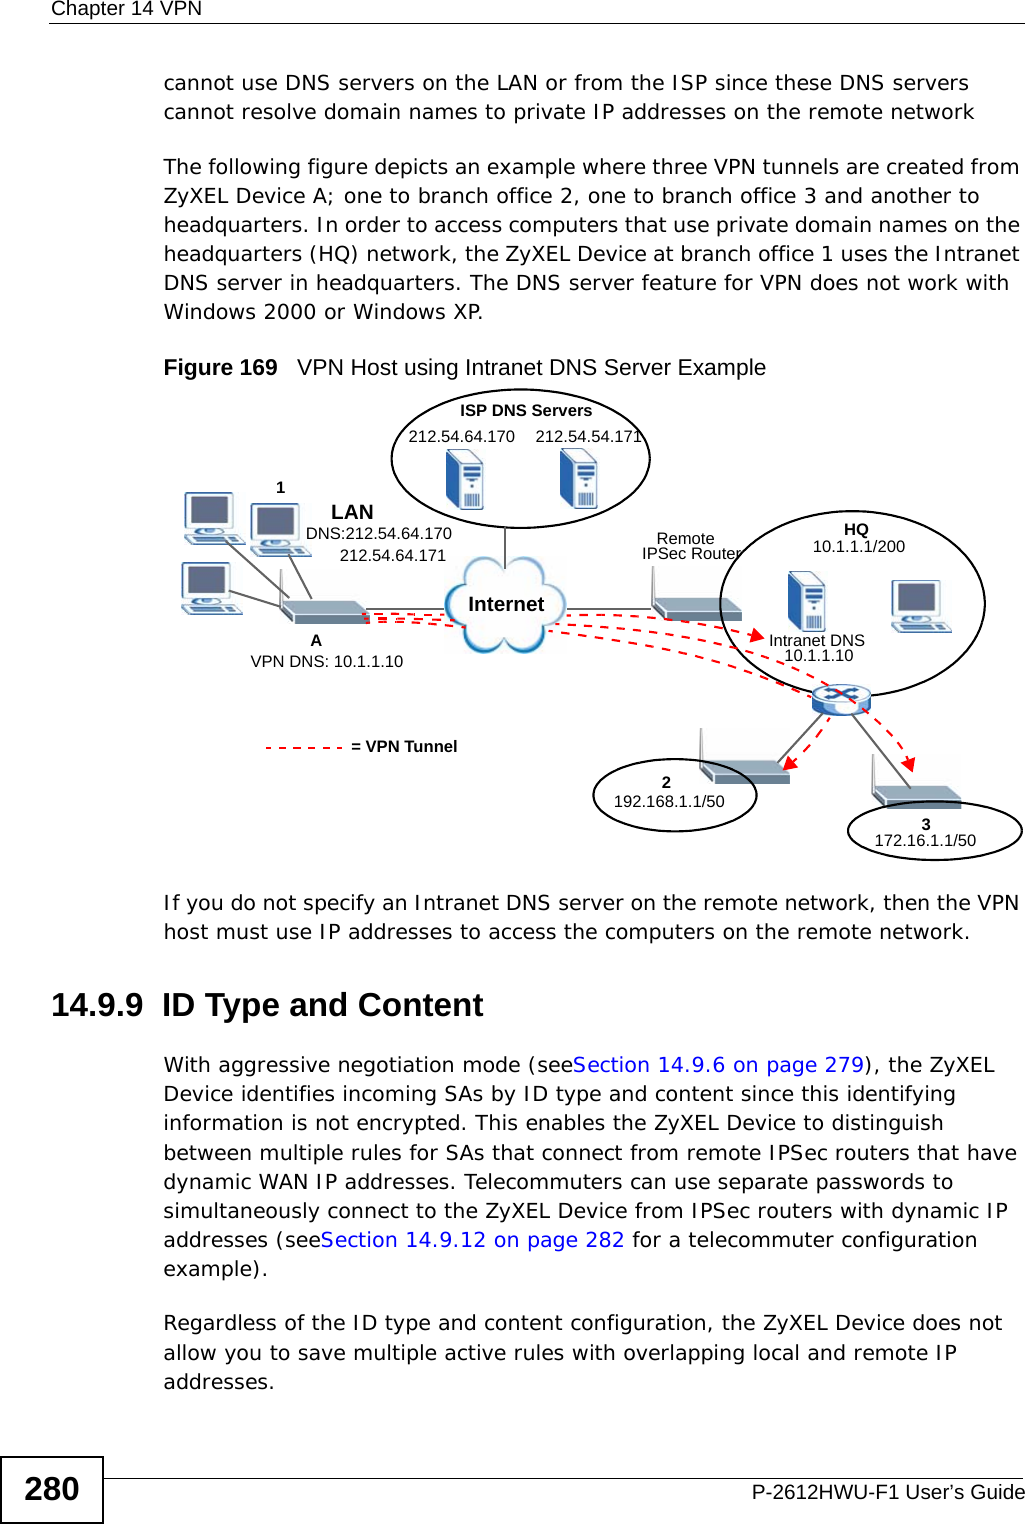 Chapter 14 VPNP-2612HWU-F1 User’s Guide280cannot use DNS servers on the LAN or from the ISP since these DNS servers cannot resolve domain names to private IP addresses on the remote networkThe following figure depicts an example where three VPN tunnels are created from ZyXEL Device A; one to branch office 2, one to branch office 3 and another to headquarters. In order to access computers that use private domain names on the headquarters (HQ) network, the ZyXEL Device at branch office 1 uses the Intranet DNS server in headquarters. The DNS server feature for VPN does not work with Windows 2000 or Windows XP.Figure 169   VPN Host using Intranet DNS Server ExampleIf you do not specify an Intranet DNS server on the remote network, then the VPN host must use IP addresses to access the computers on the remote network.14.9.9  ID Type and ContentWith aggressive negotiation mode (seeSection 14.9.6 on page 279), the ZyXEL Device identifies incoming SAs by ID type and content since this identifying information is not encrypted. This enables the ZyXEL Device to distinguish between multiple rules for SAs that connect from remote IPSec routers that have dynamic WAN IP addresses. Telecommuters can use separate passwords to simultaneously connect to the ZyXEL Device from IPSec routers with dynamic IP addresses (seeSection 14.9.12 on page 282 for a telecommuter configuration example).Regardless of the ID type and content configuration, the ZyXEL Device does not allow you to save multiple active rules with overlapping local and remote IP addresses.RemoteIPSec RouterHQ10.1.1.1/200Intranet DNS10.1.1.10ISP DNS Servers212.54.64.170 212.54.54.171InternetLANDNS:212.54.64.170        212.54.64.171AVPN DNS: 10.1.1.10= VPN Tunnel2192.168.1.1/503172.16.1.1/501